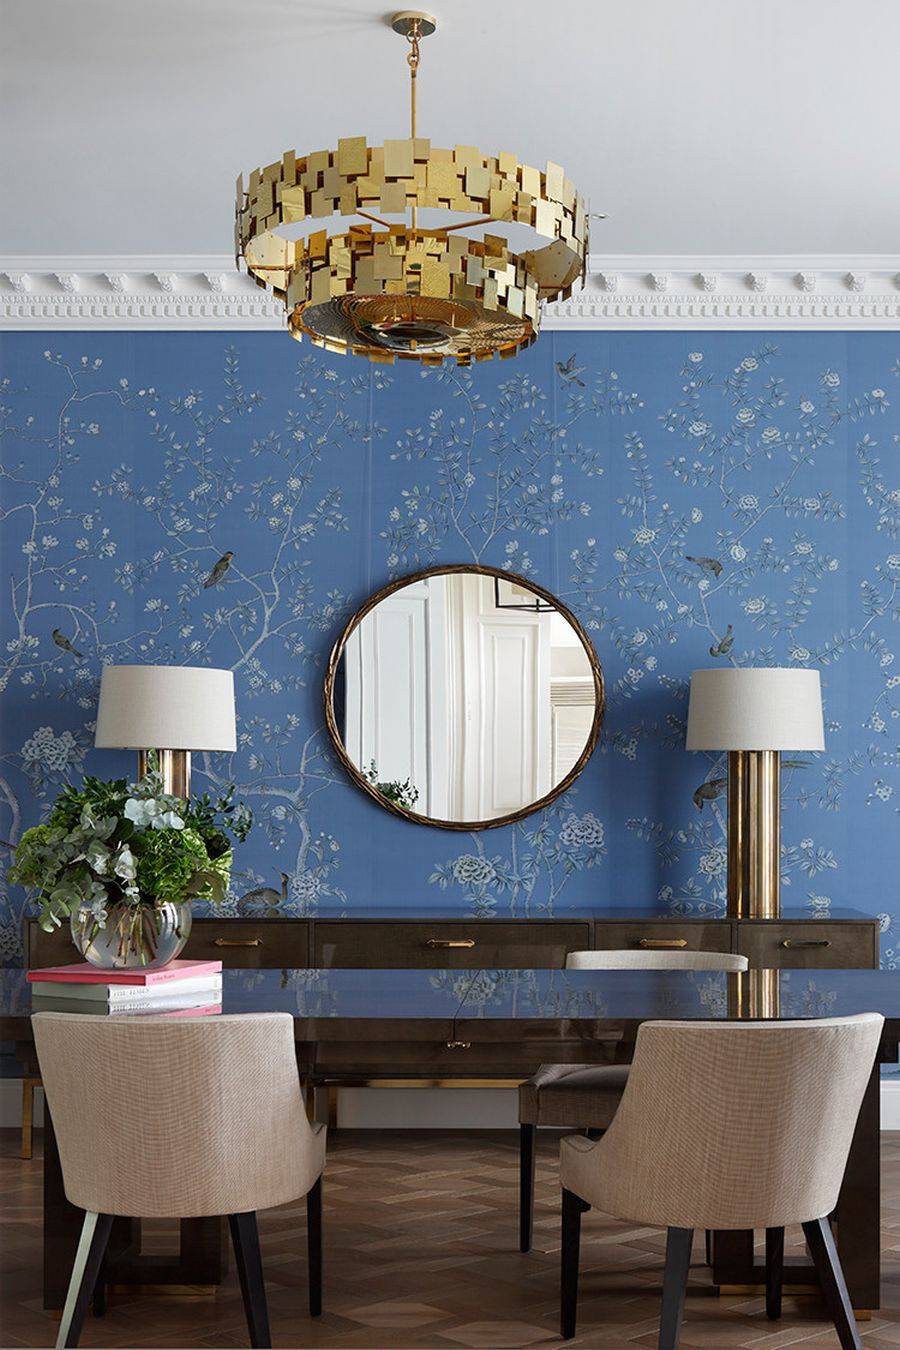 Blue wallpaper with pattern brings cheerful charm to this dining space